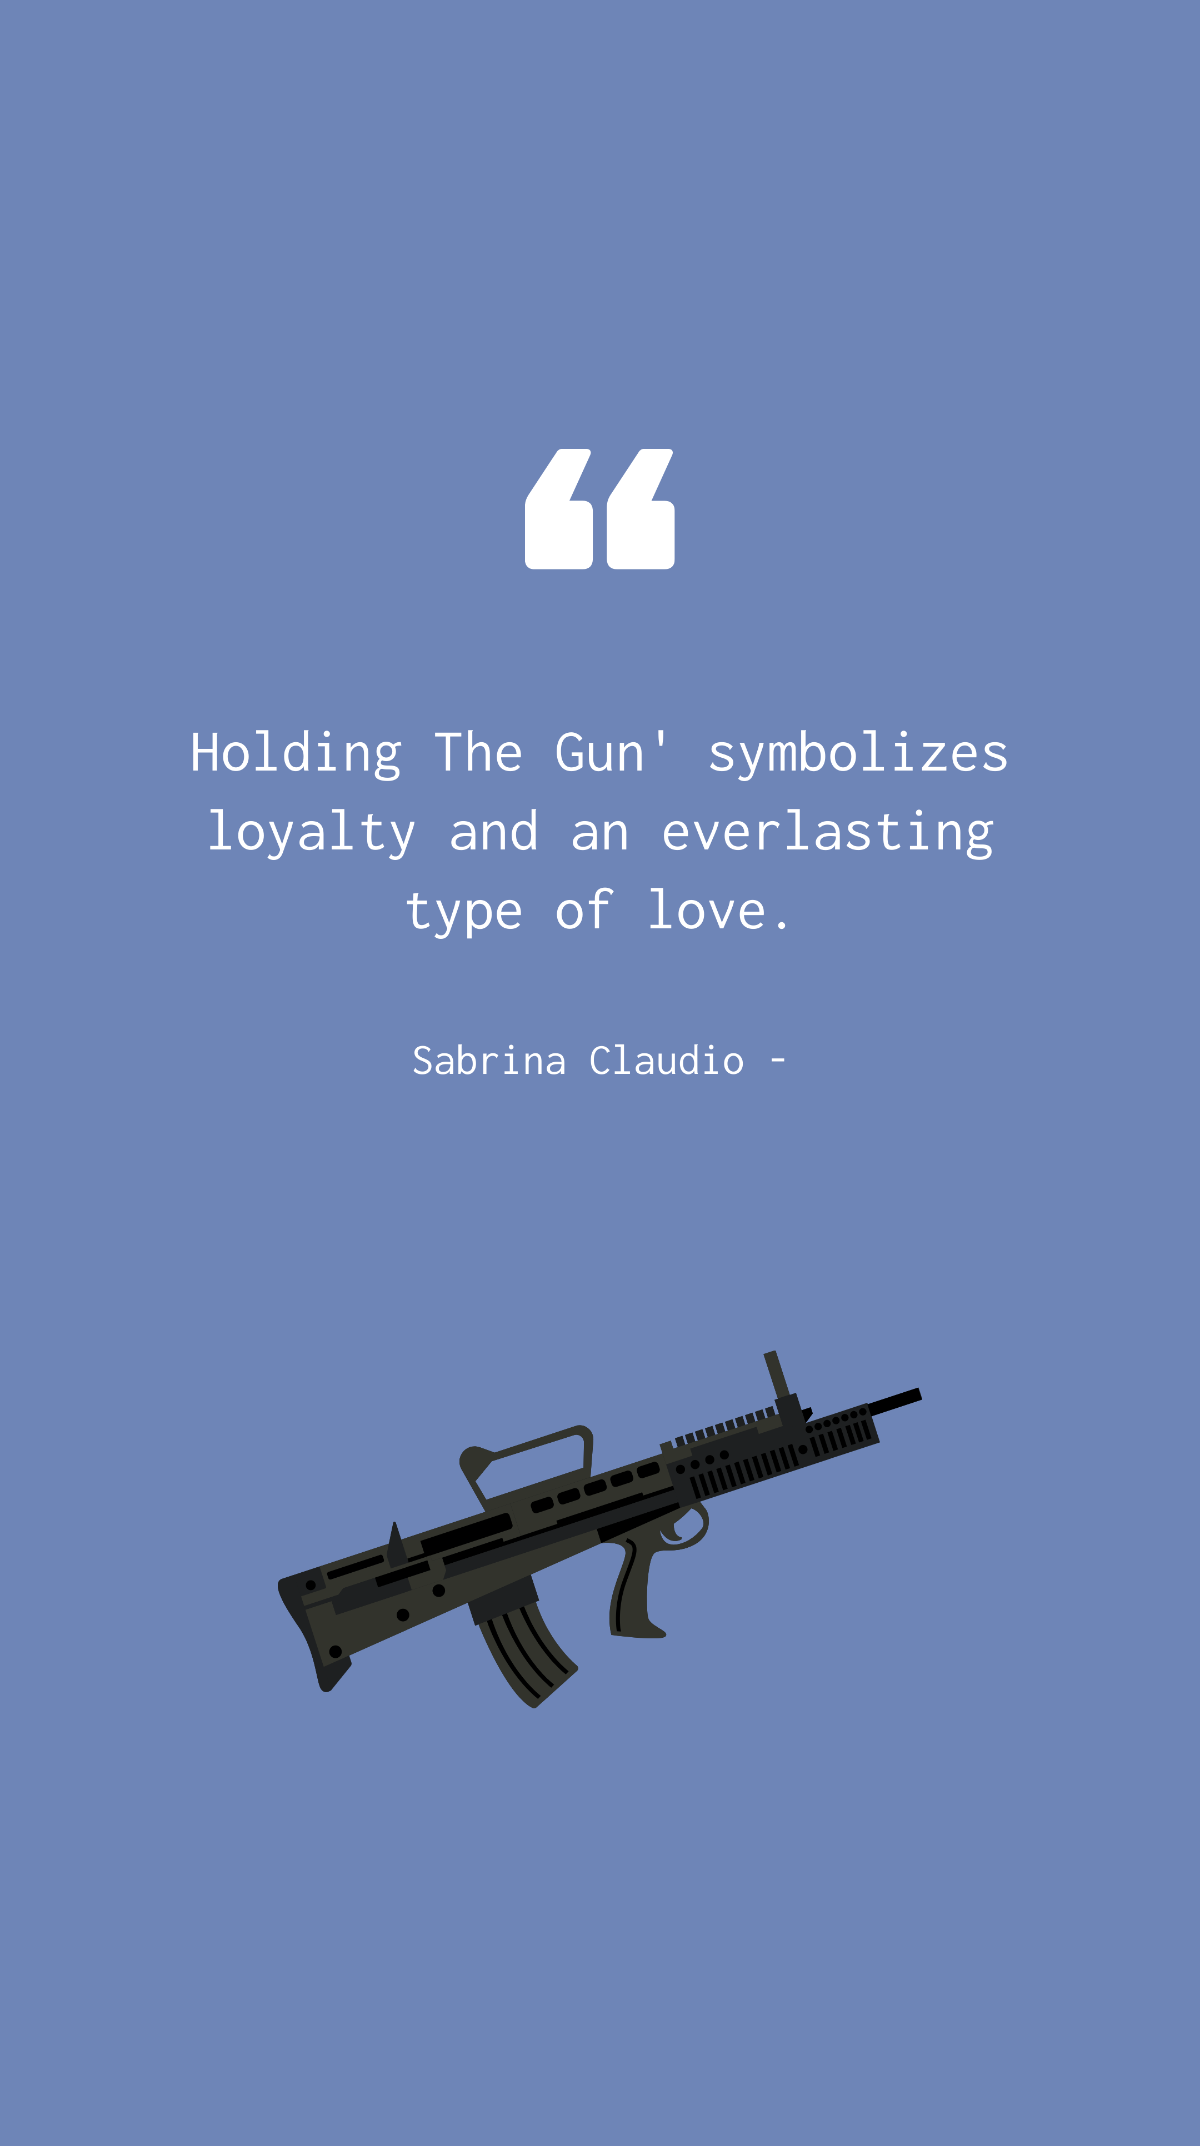 Sabrina Claudio - Holding The Gun' symbolizes loyalty and an everlasting type of love. Template